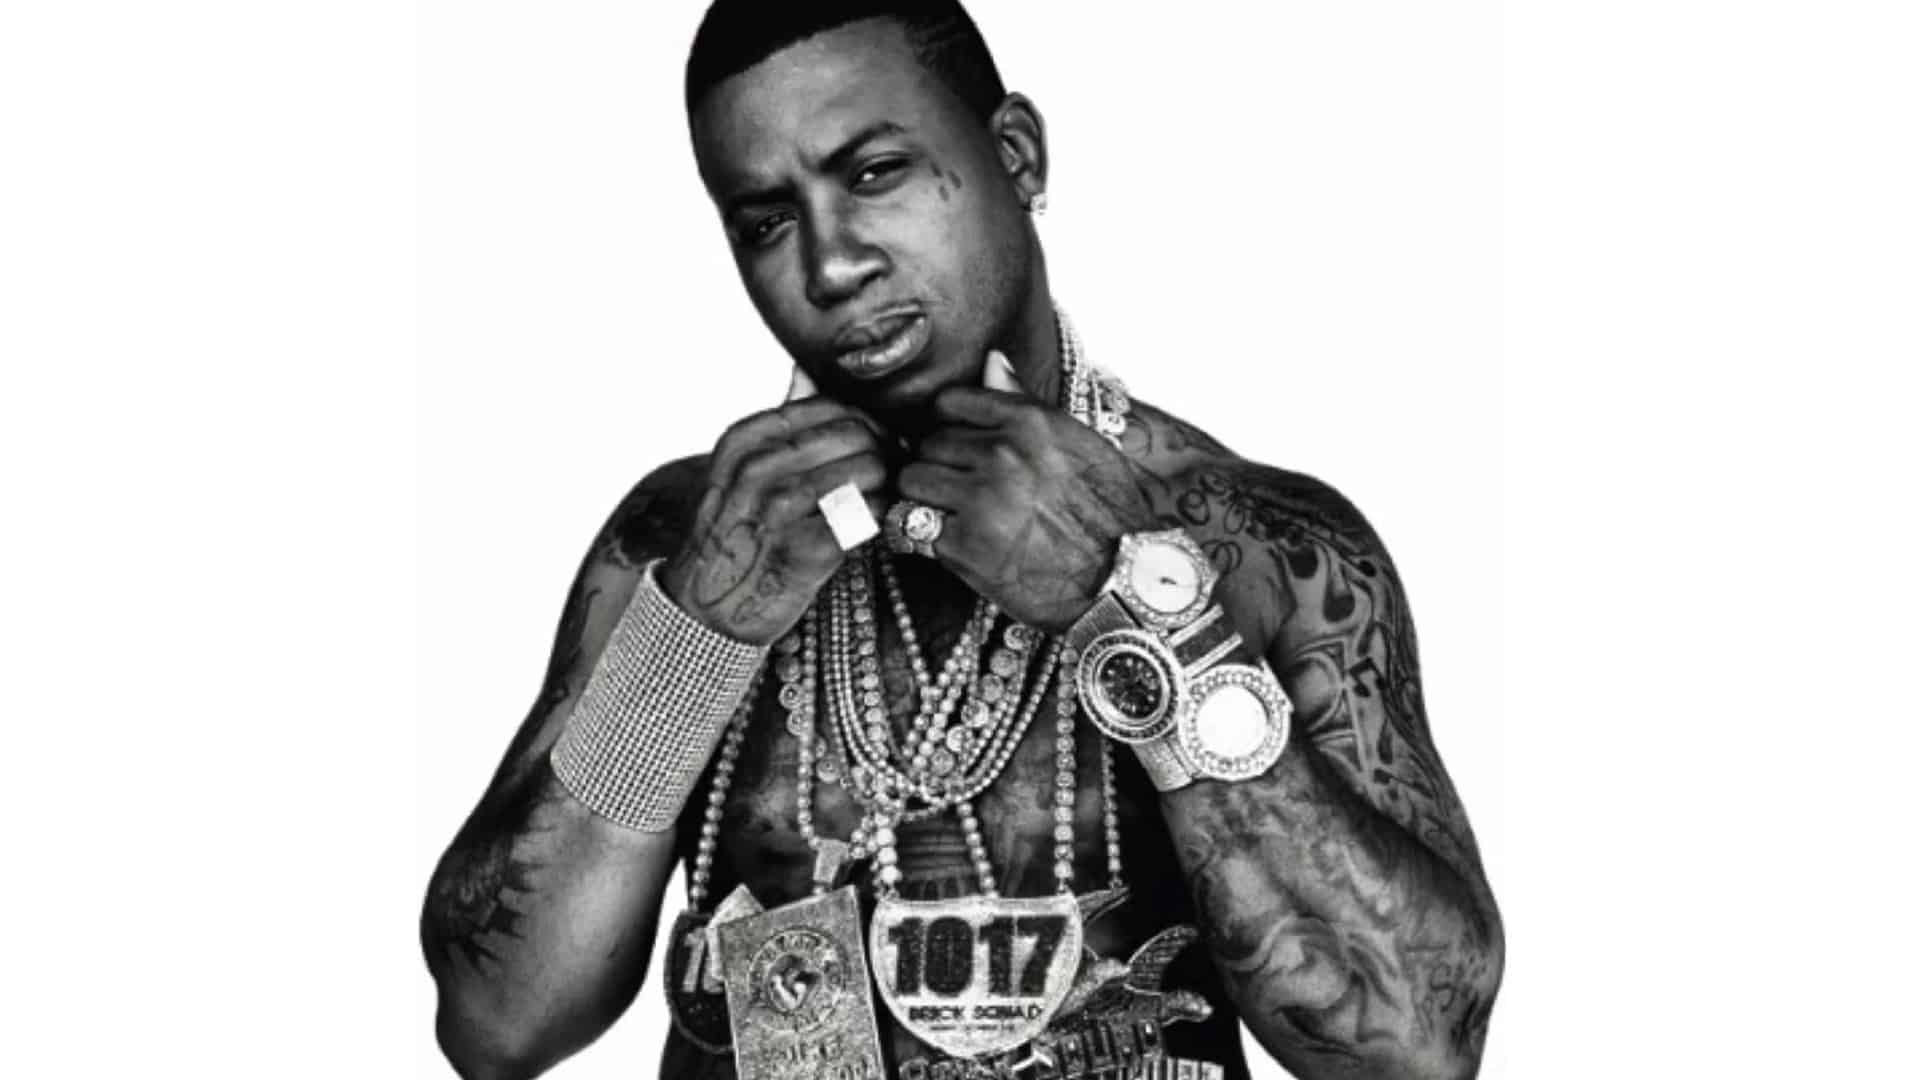 Gucci Mane Comes Back With New Album - The Knockturnal